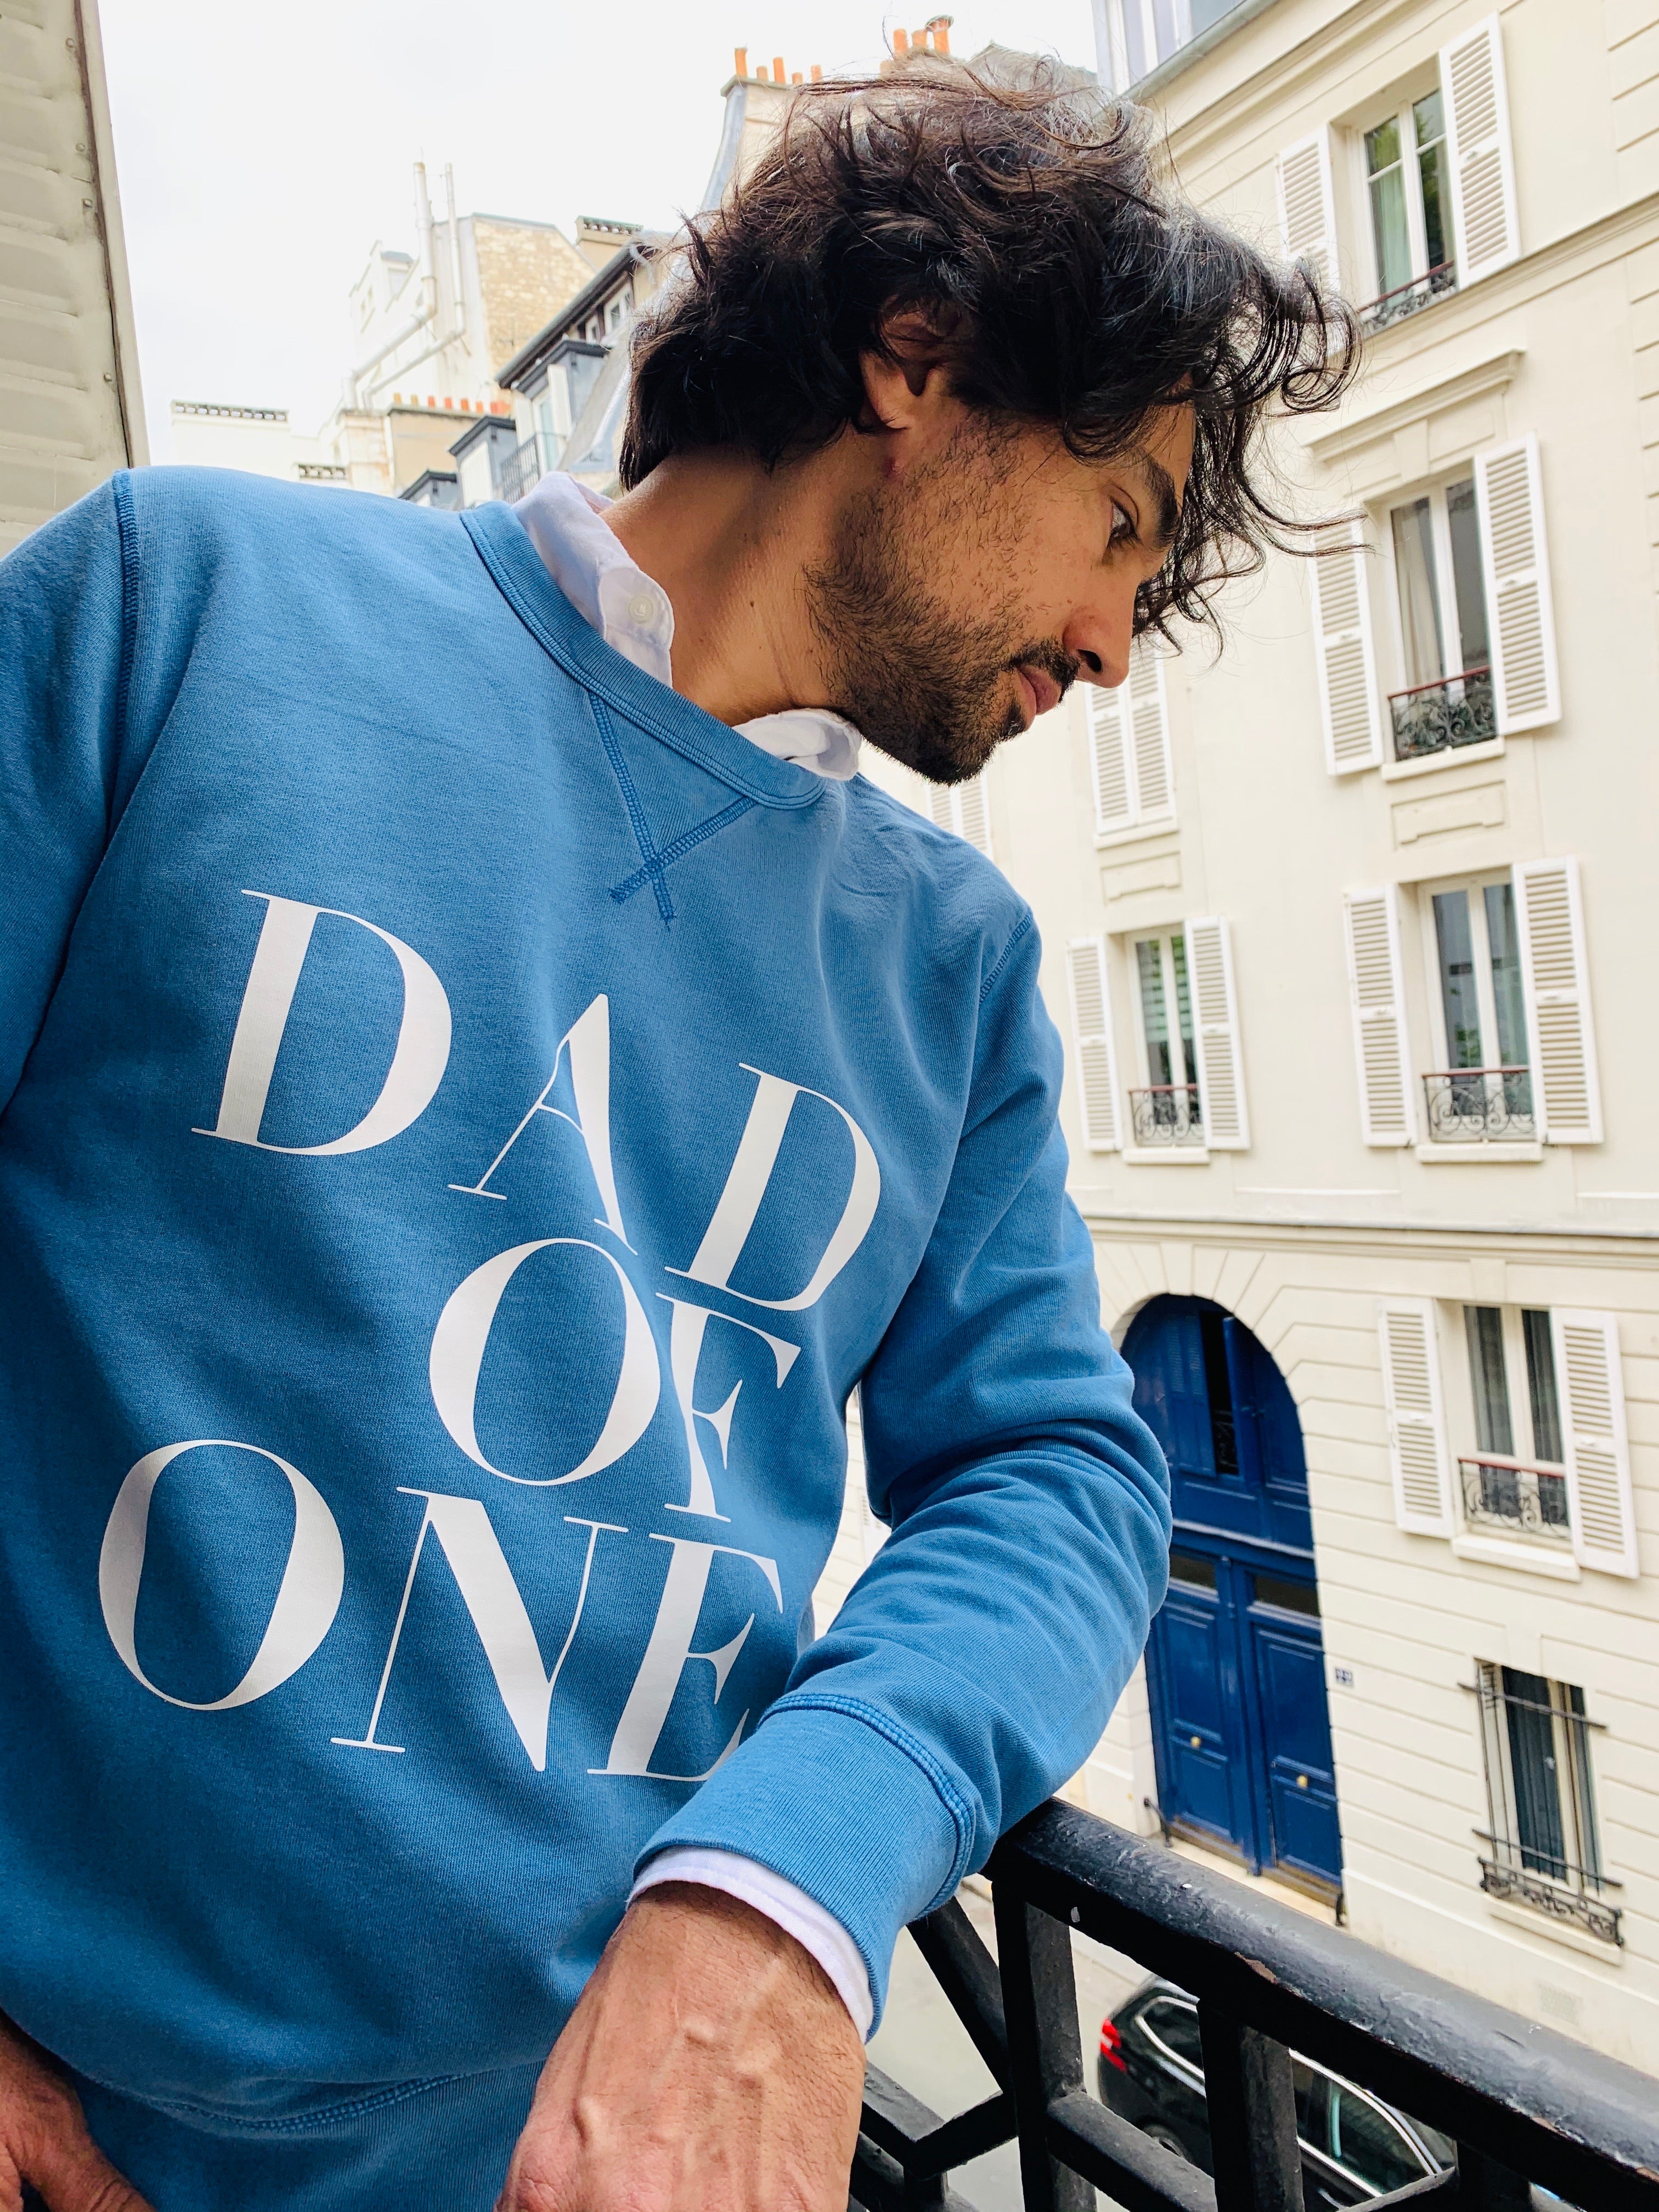 SWEAT SHIRT DAD OF ONE, DAD OF TWO, DAD OF THREE, FOUR... TWINS : BLEU VINTAGE